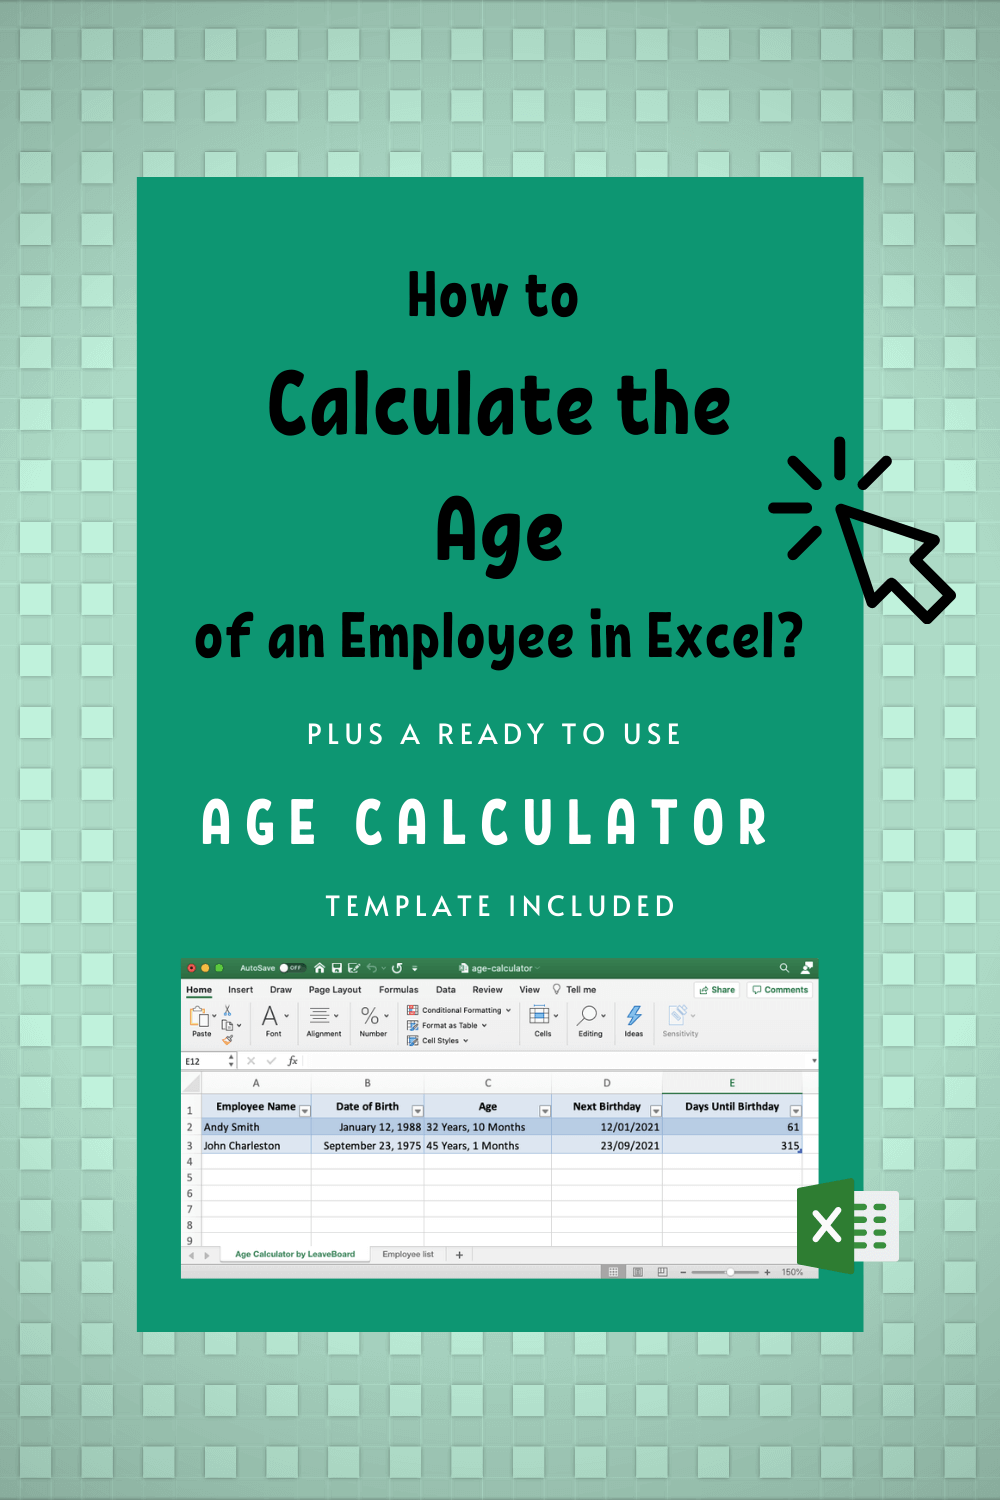 How to Calculate the Age of a Person in Excel (With Free Age